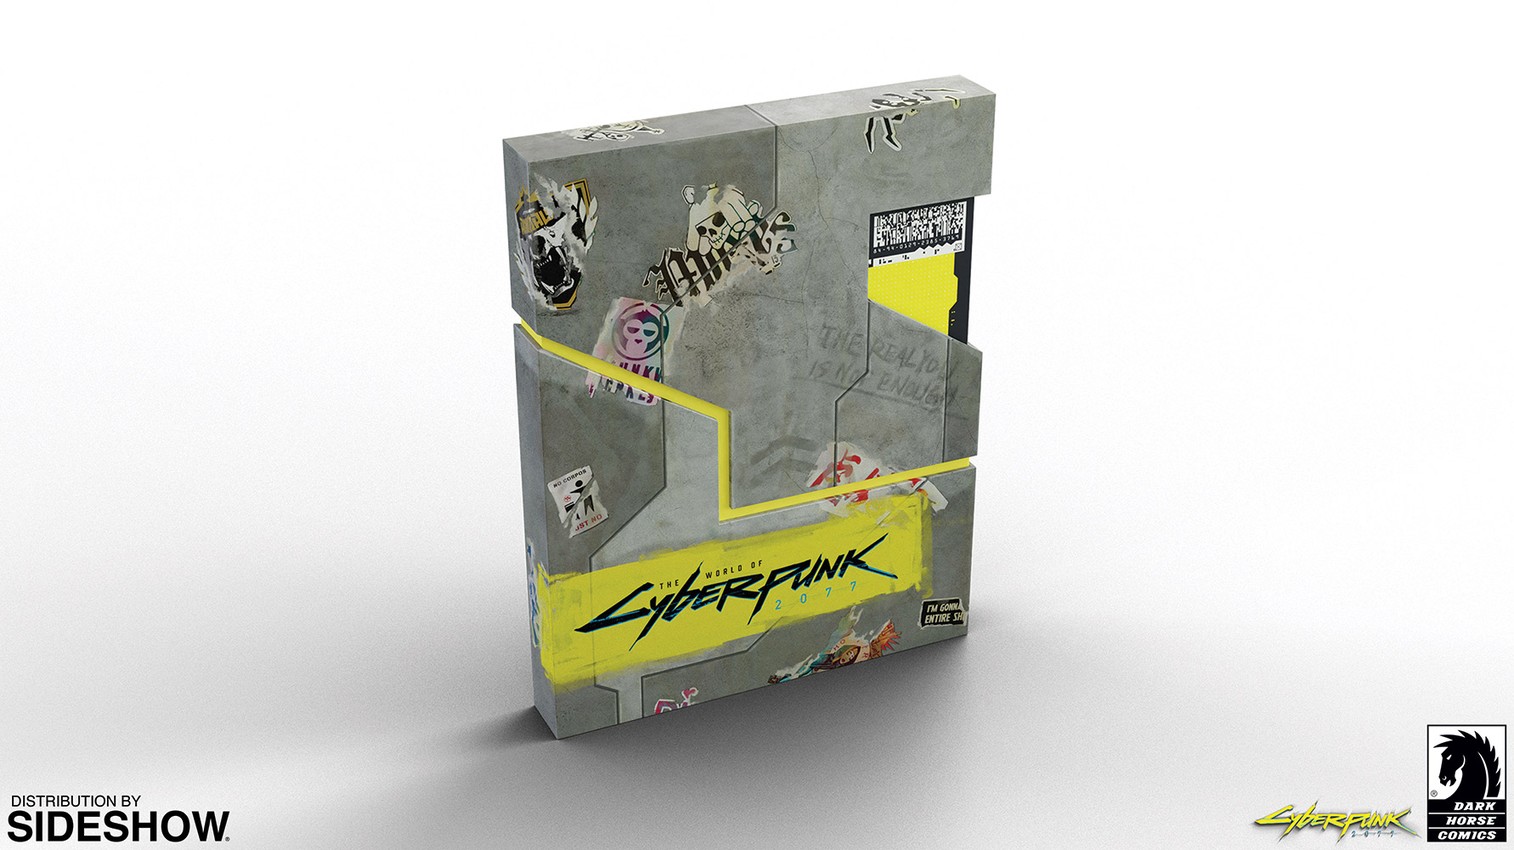 The World of Cyberpunk 2077 (Deluxe Edition)- Prototype Shown View 2